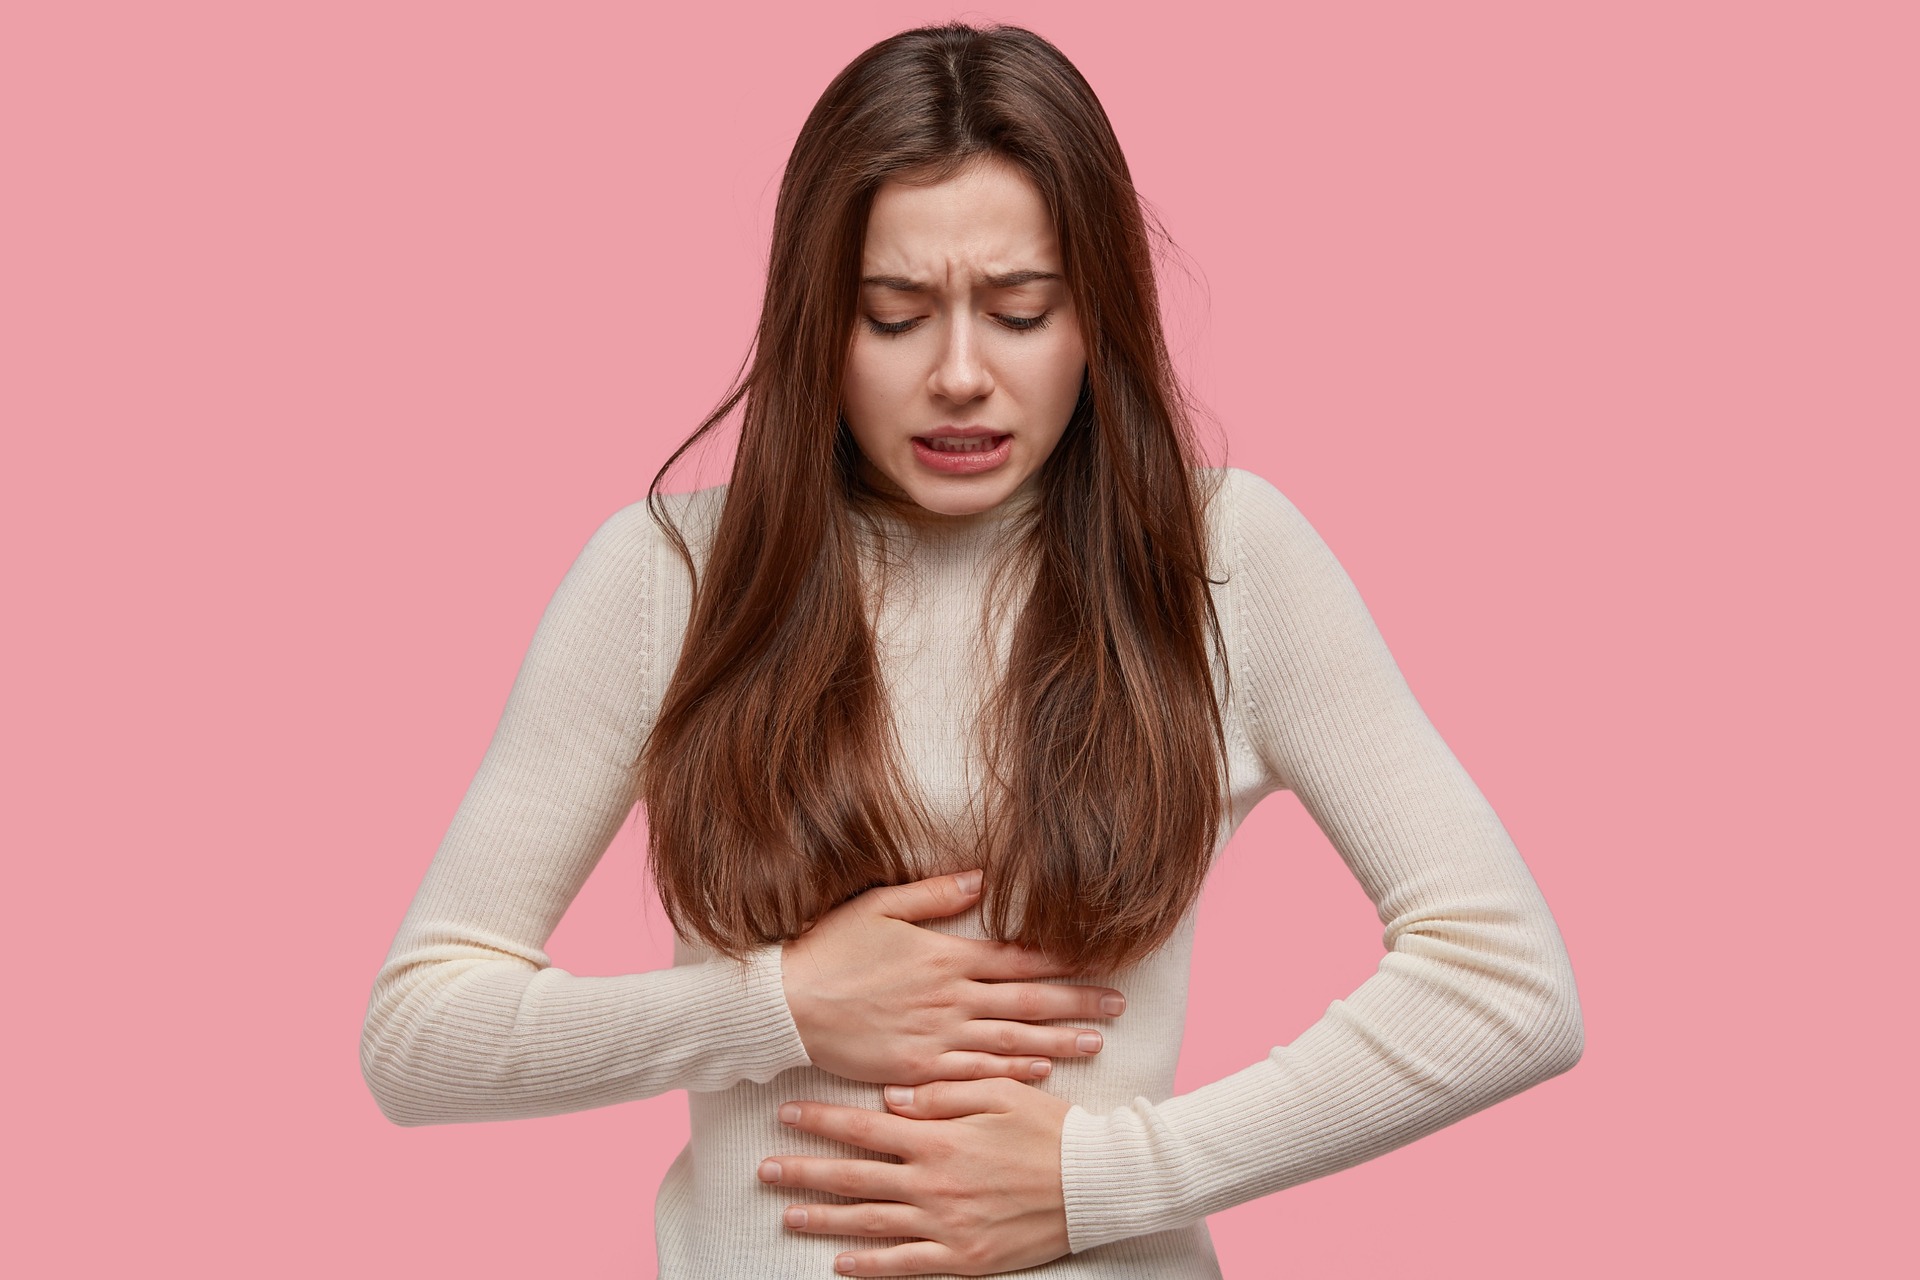 Endometriosis Awareness Month: 4 Early Signs To Look For